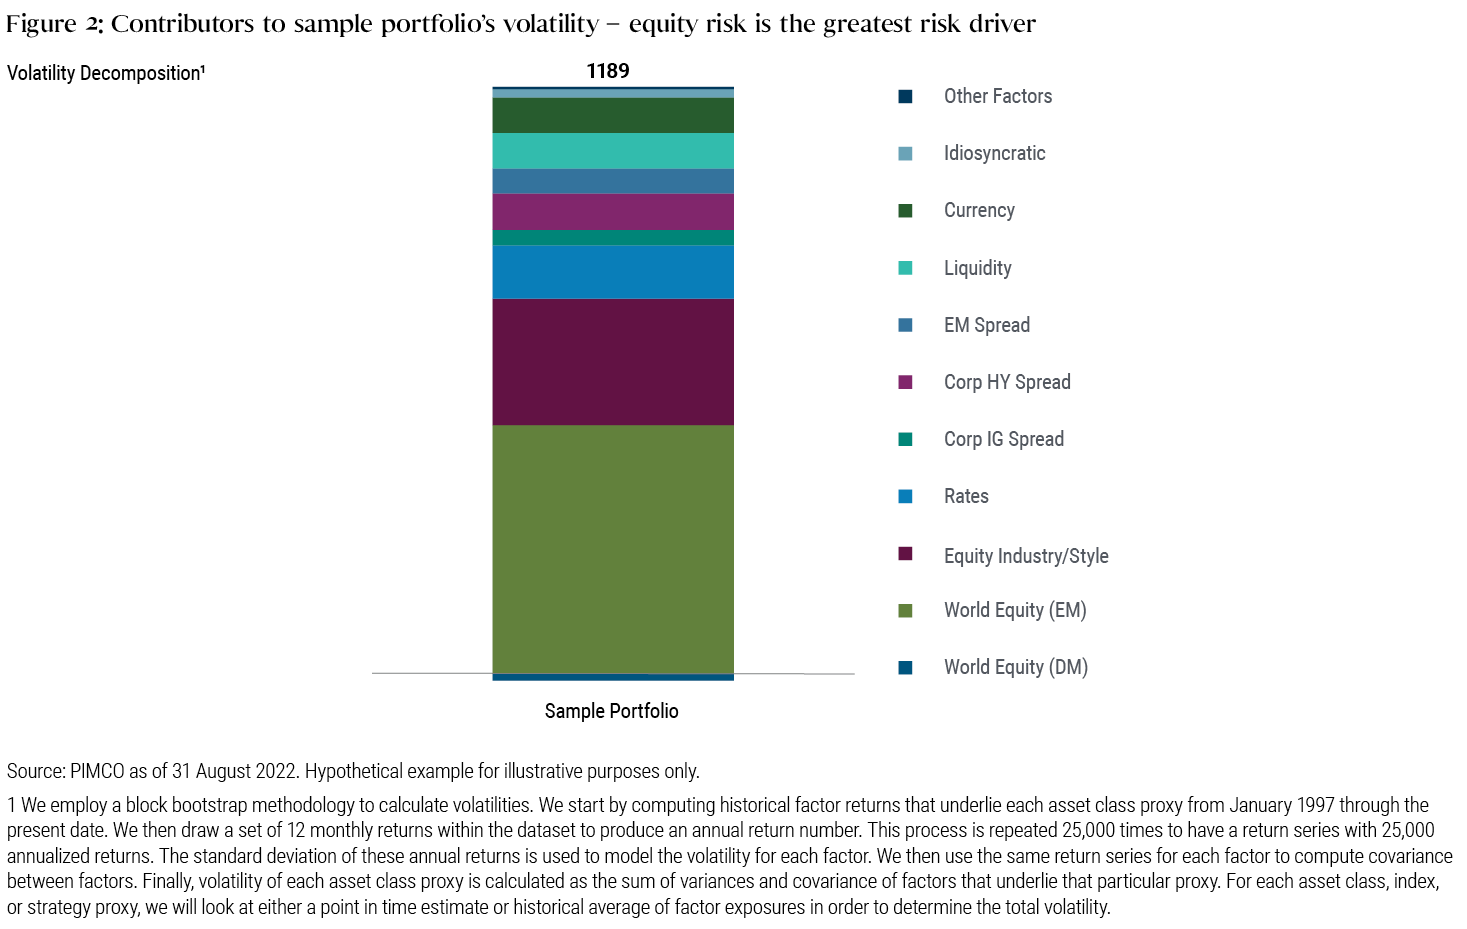 Figure2: The stacked bar chart shows the contributors to the sample portfolio’s volatility from a variety of risk factors. It highlights that equity risk is the greatest risk driver in the sample portfolio, contributing 74% of overall risk.